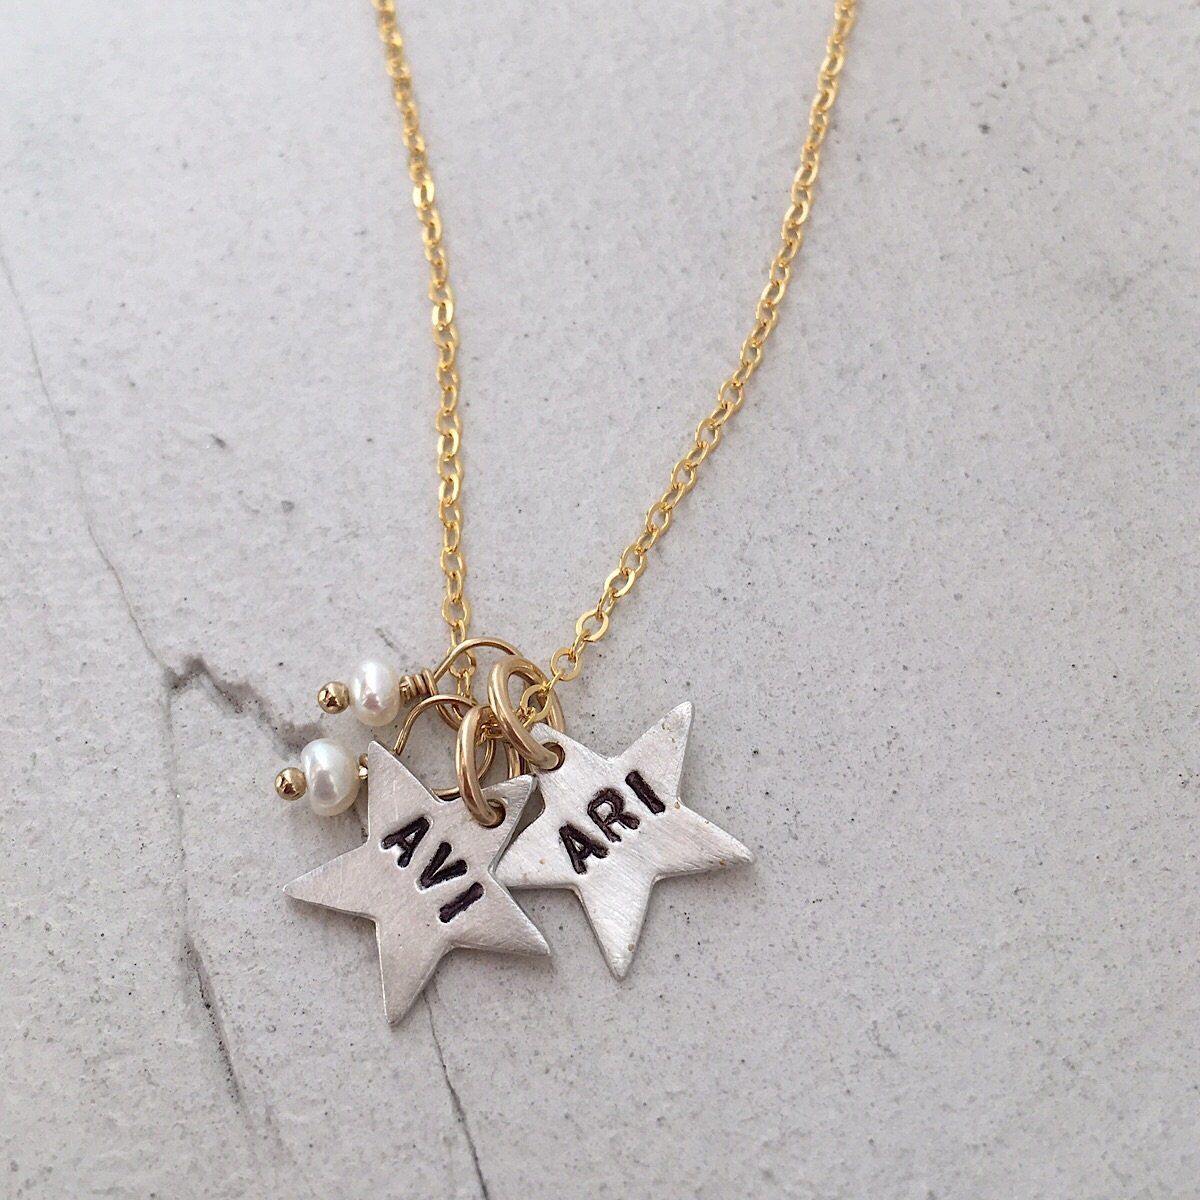 Gold Star Charm - IsabelleGraceJewelry